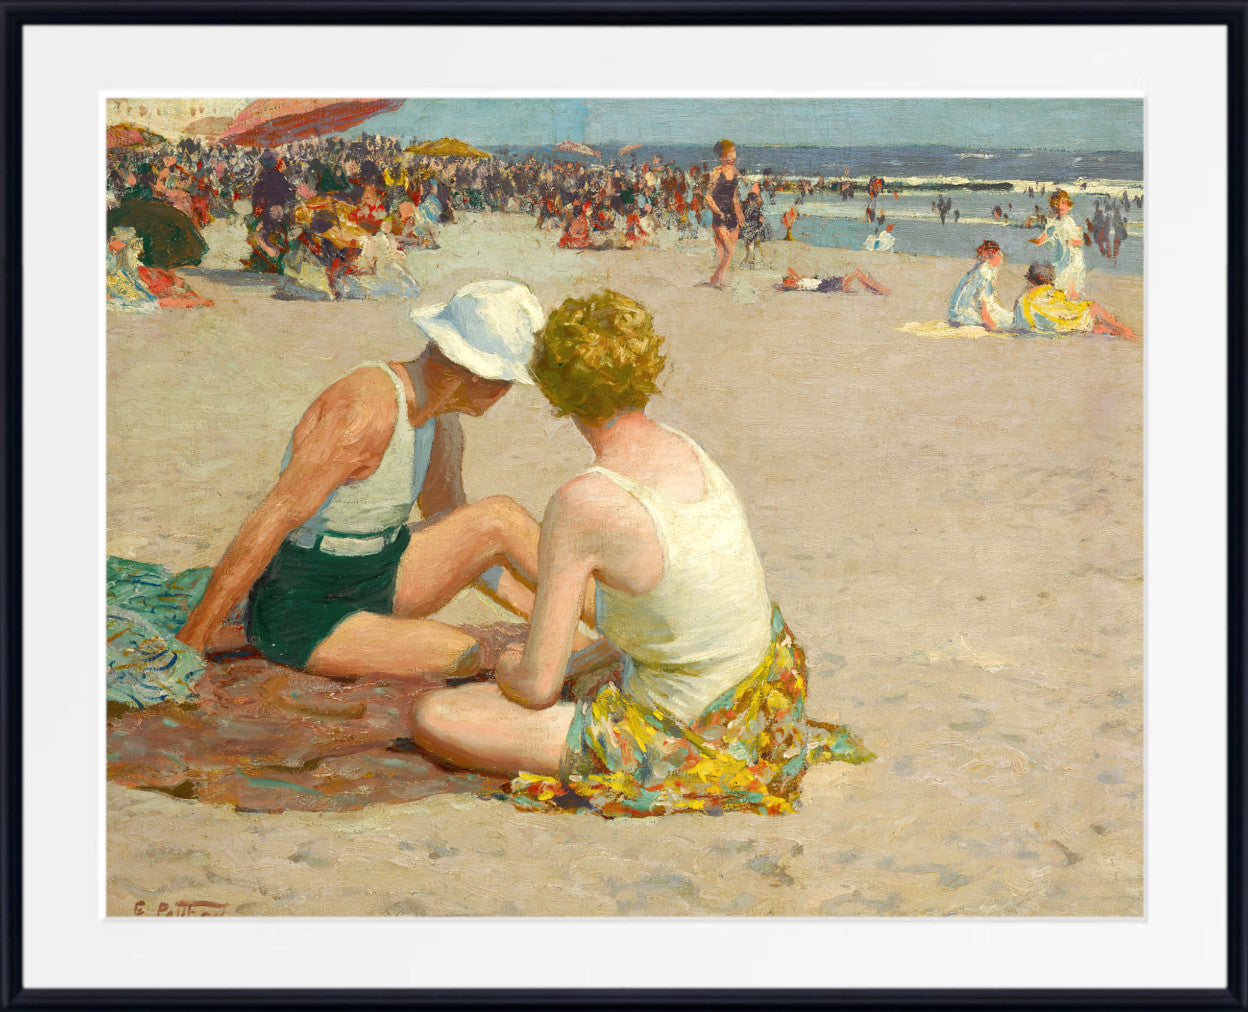 A Summer Vacation (circa 1920–1925) by Edward Henry Potthast